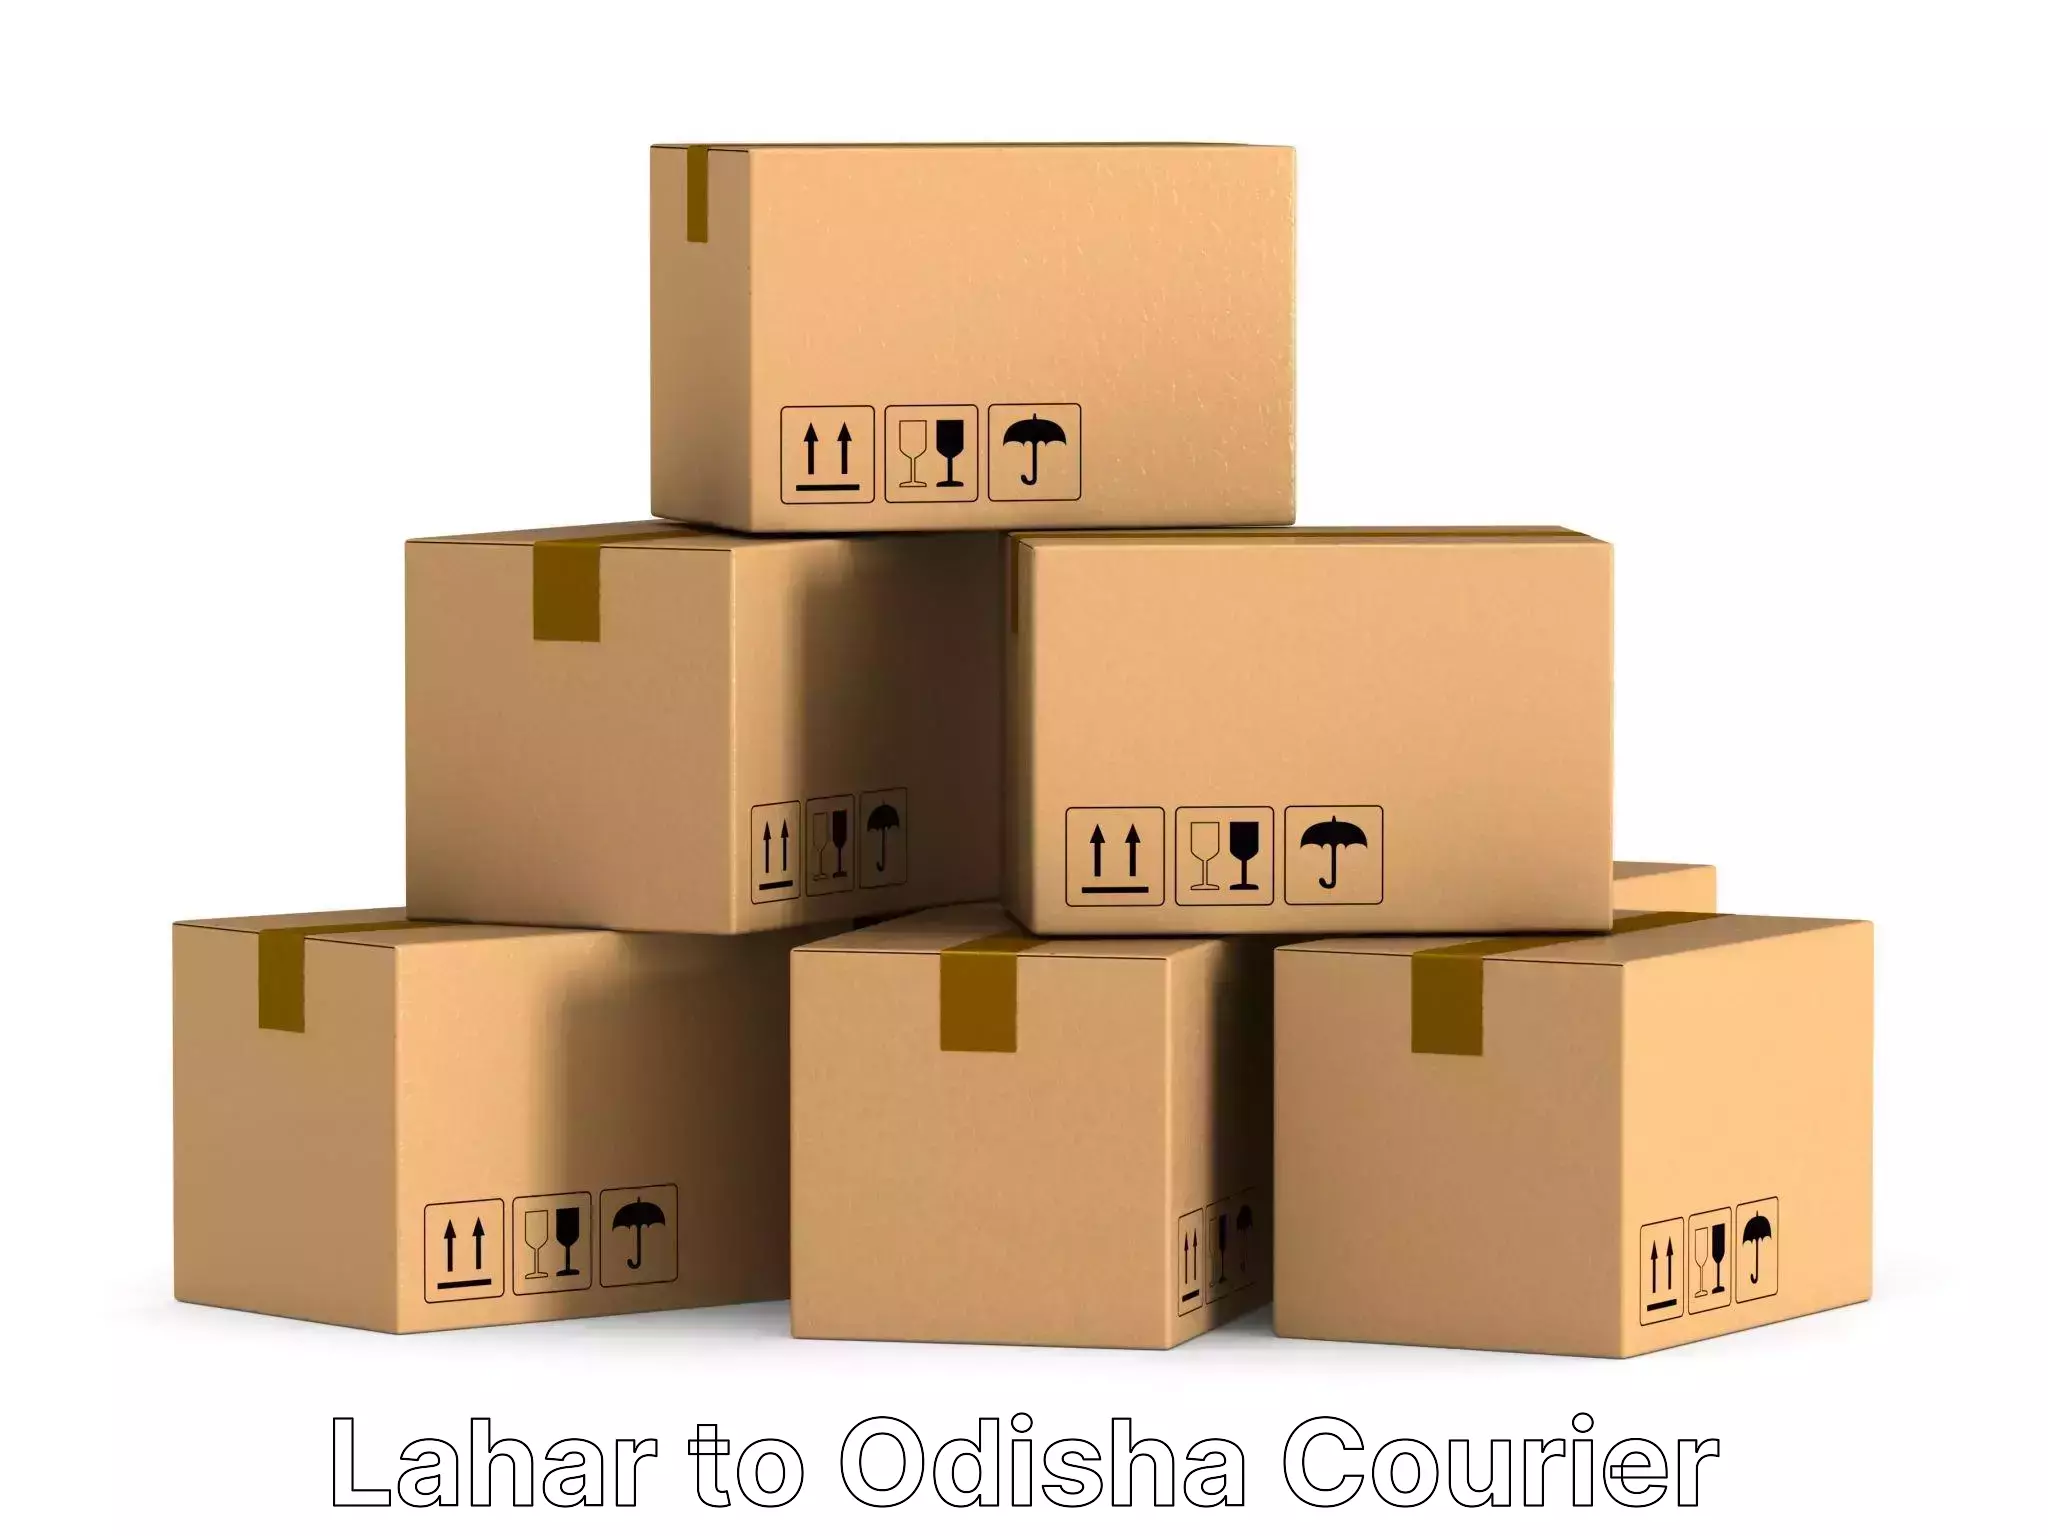 Home shifting experts Lahar to Chandipur